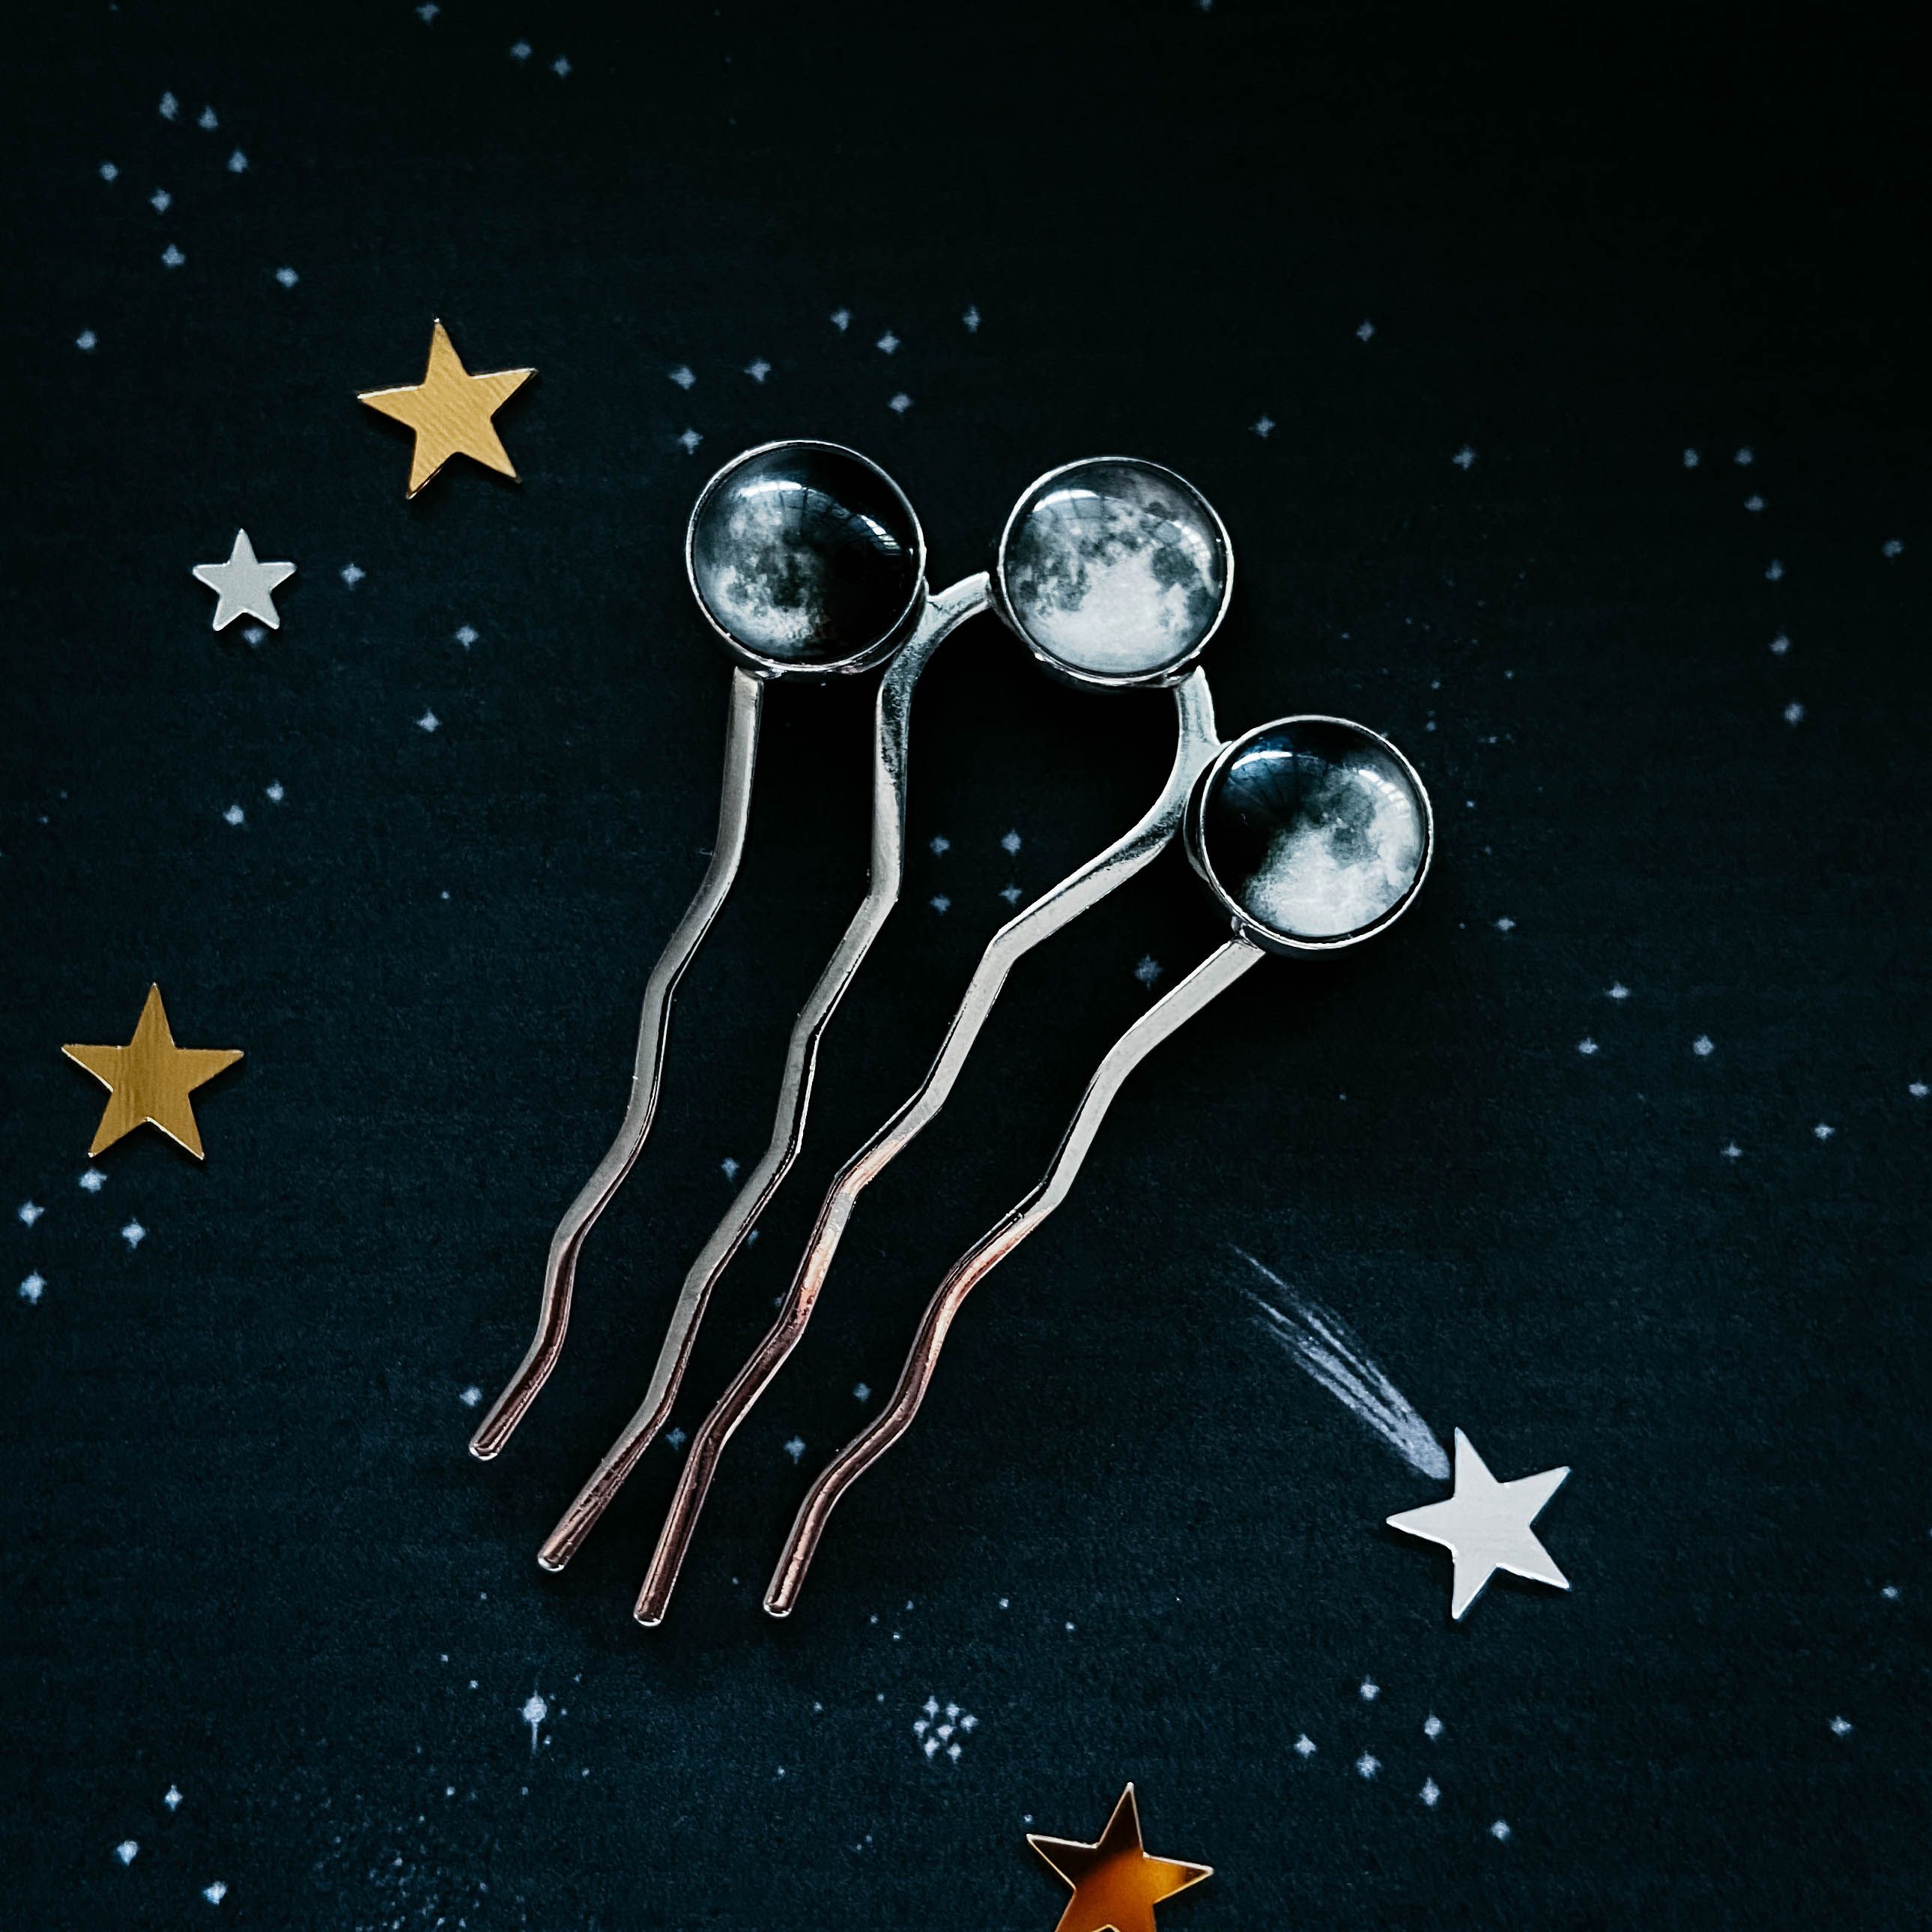 A set of three hair combs with stars - Moon phases